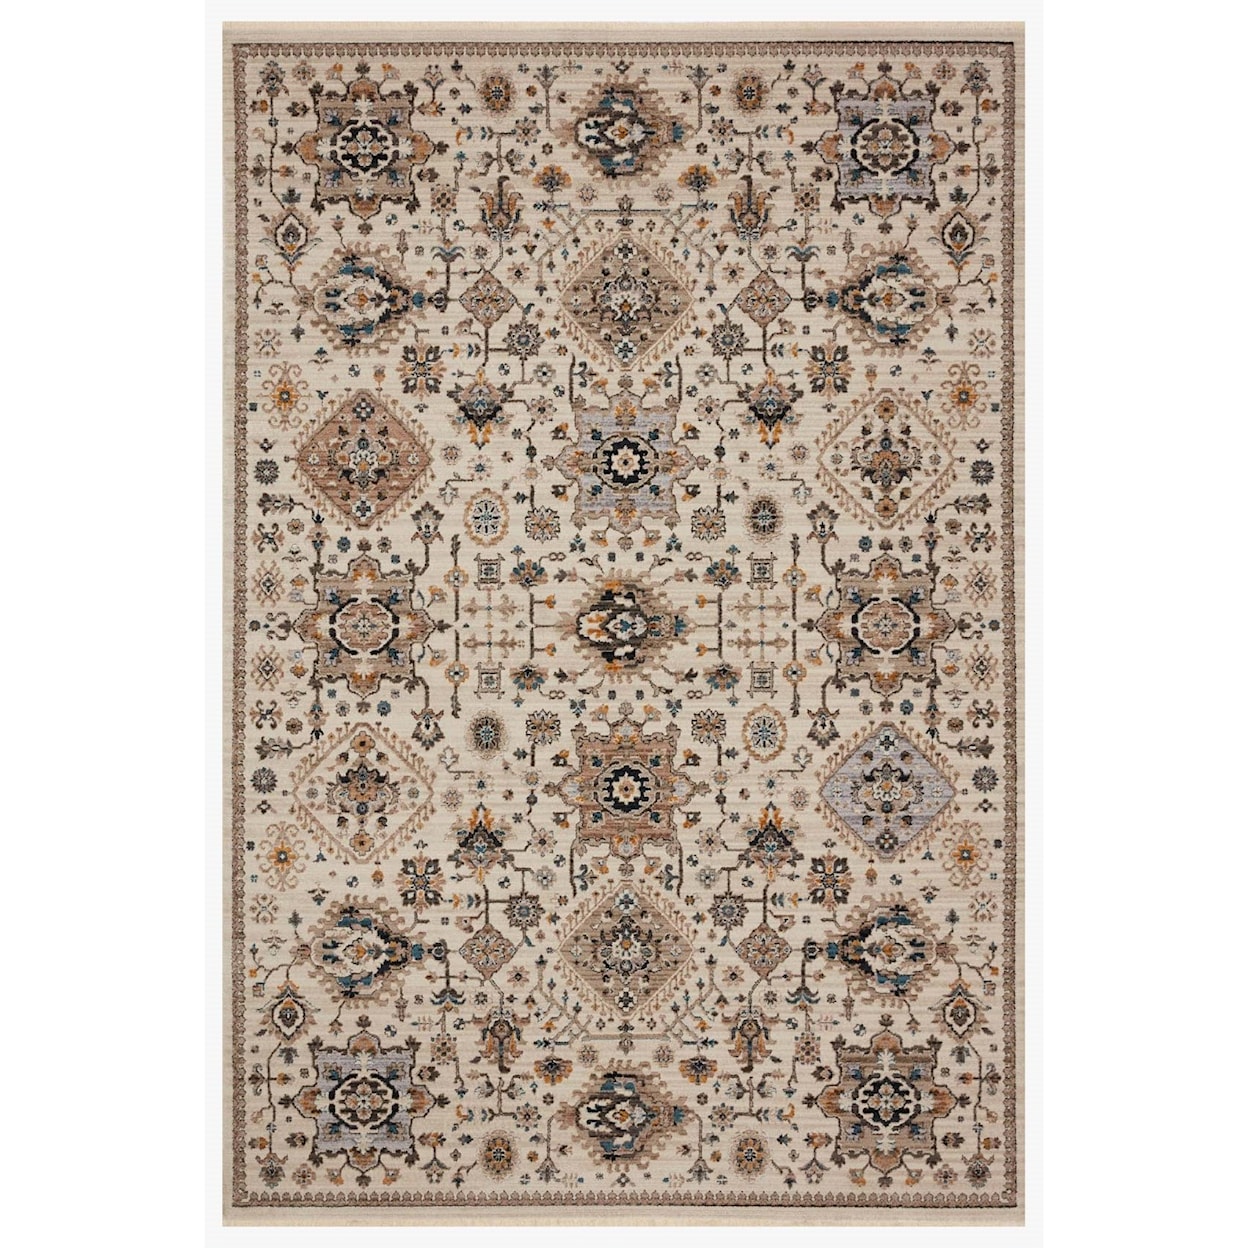 Loloi Rugs Leigh 5'3" x 7'6" Ivory / Taupe Rug